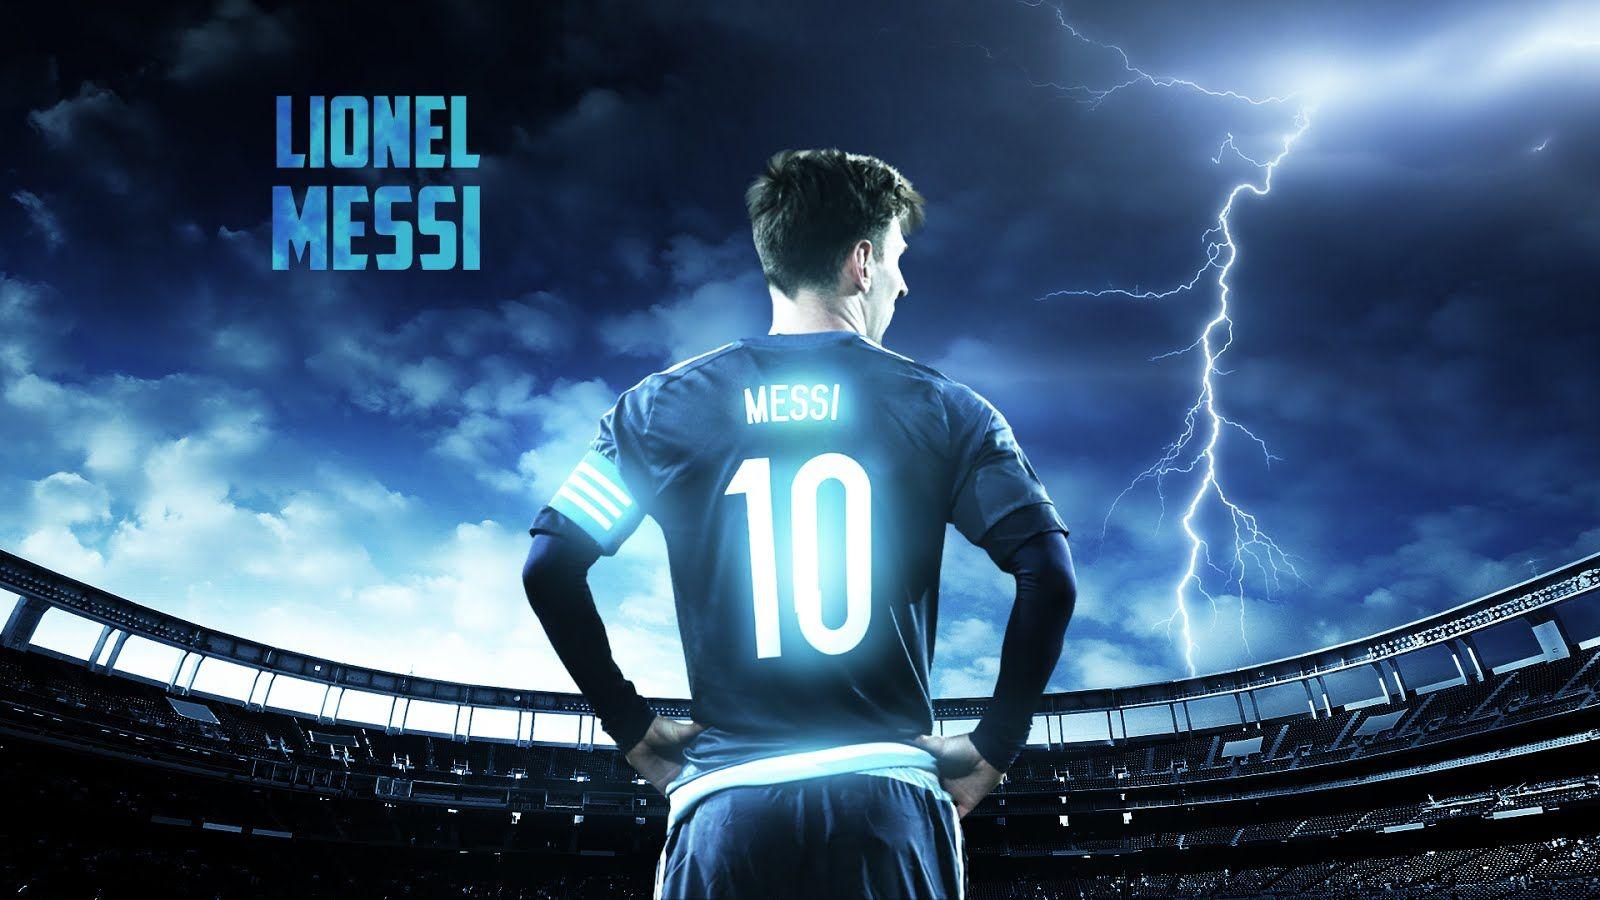 Messi 2017 wallpaper music ios icon image gold canyon